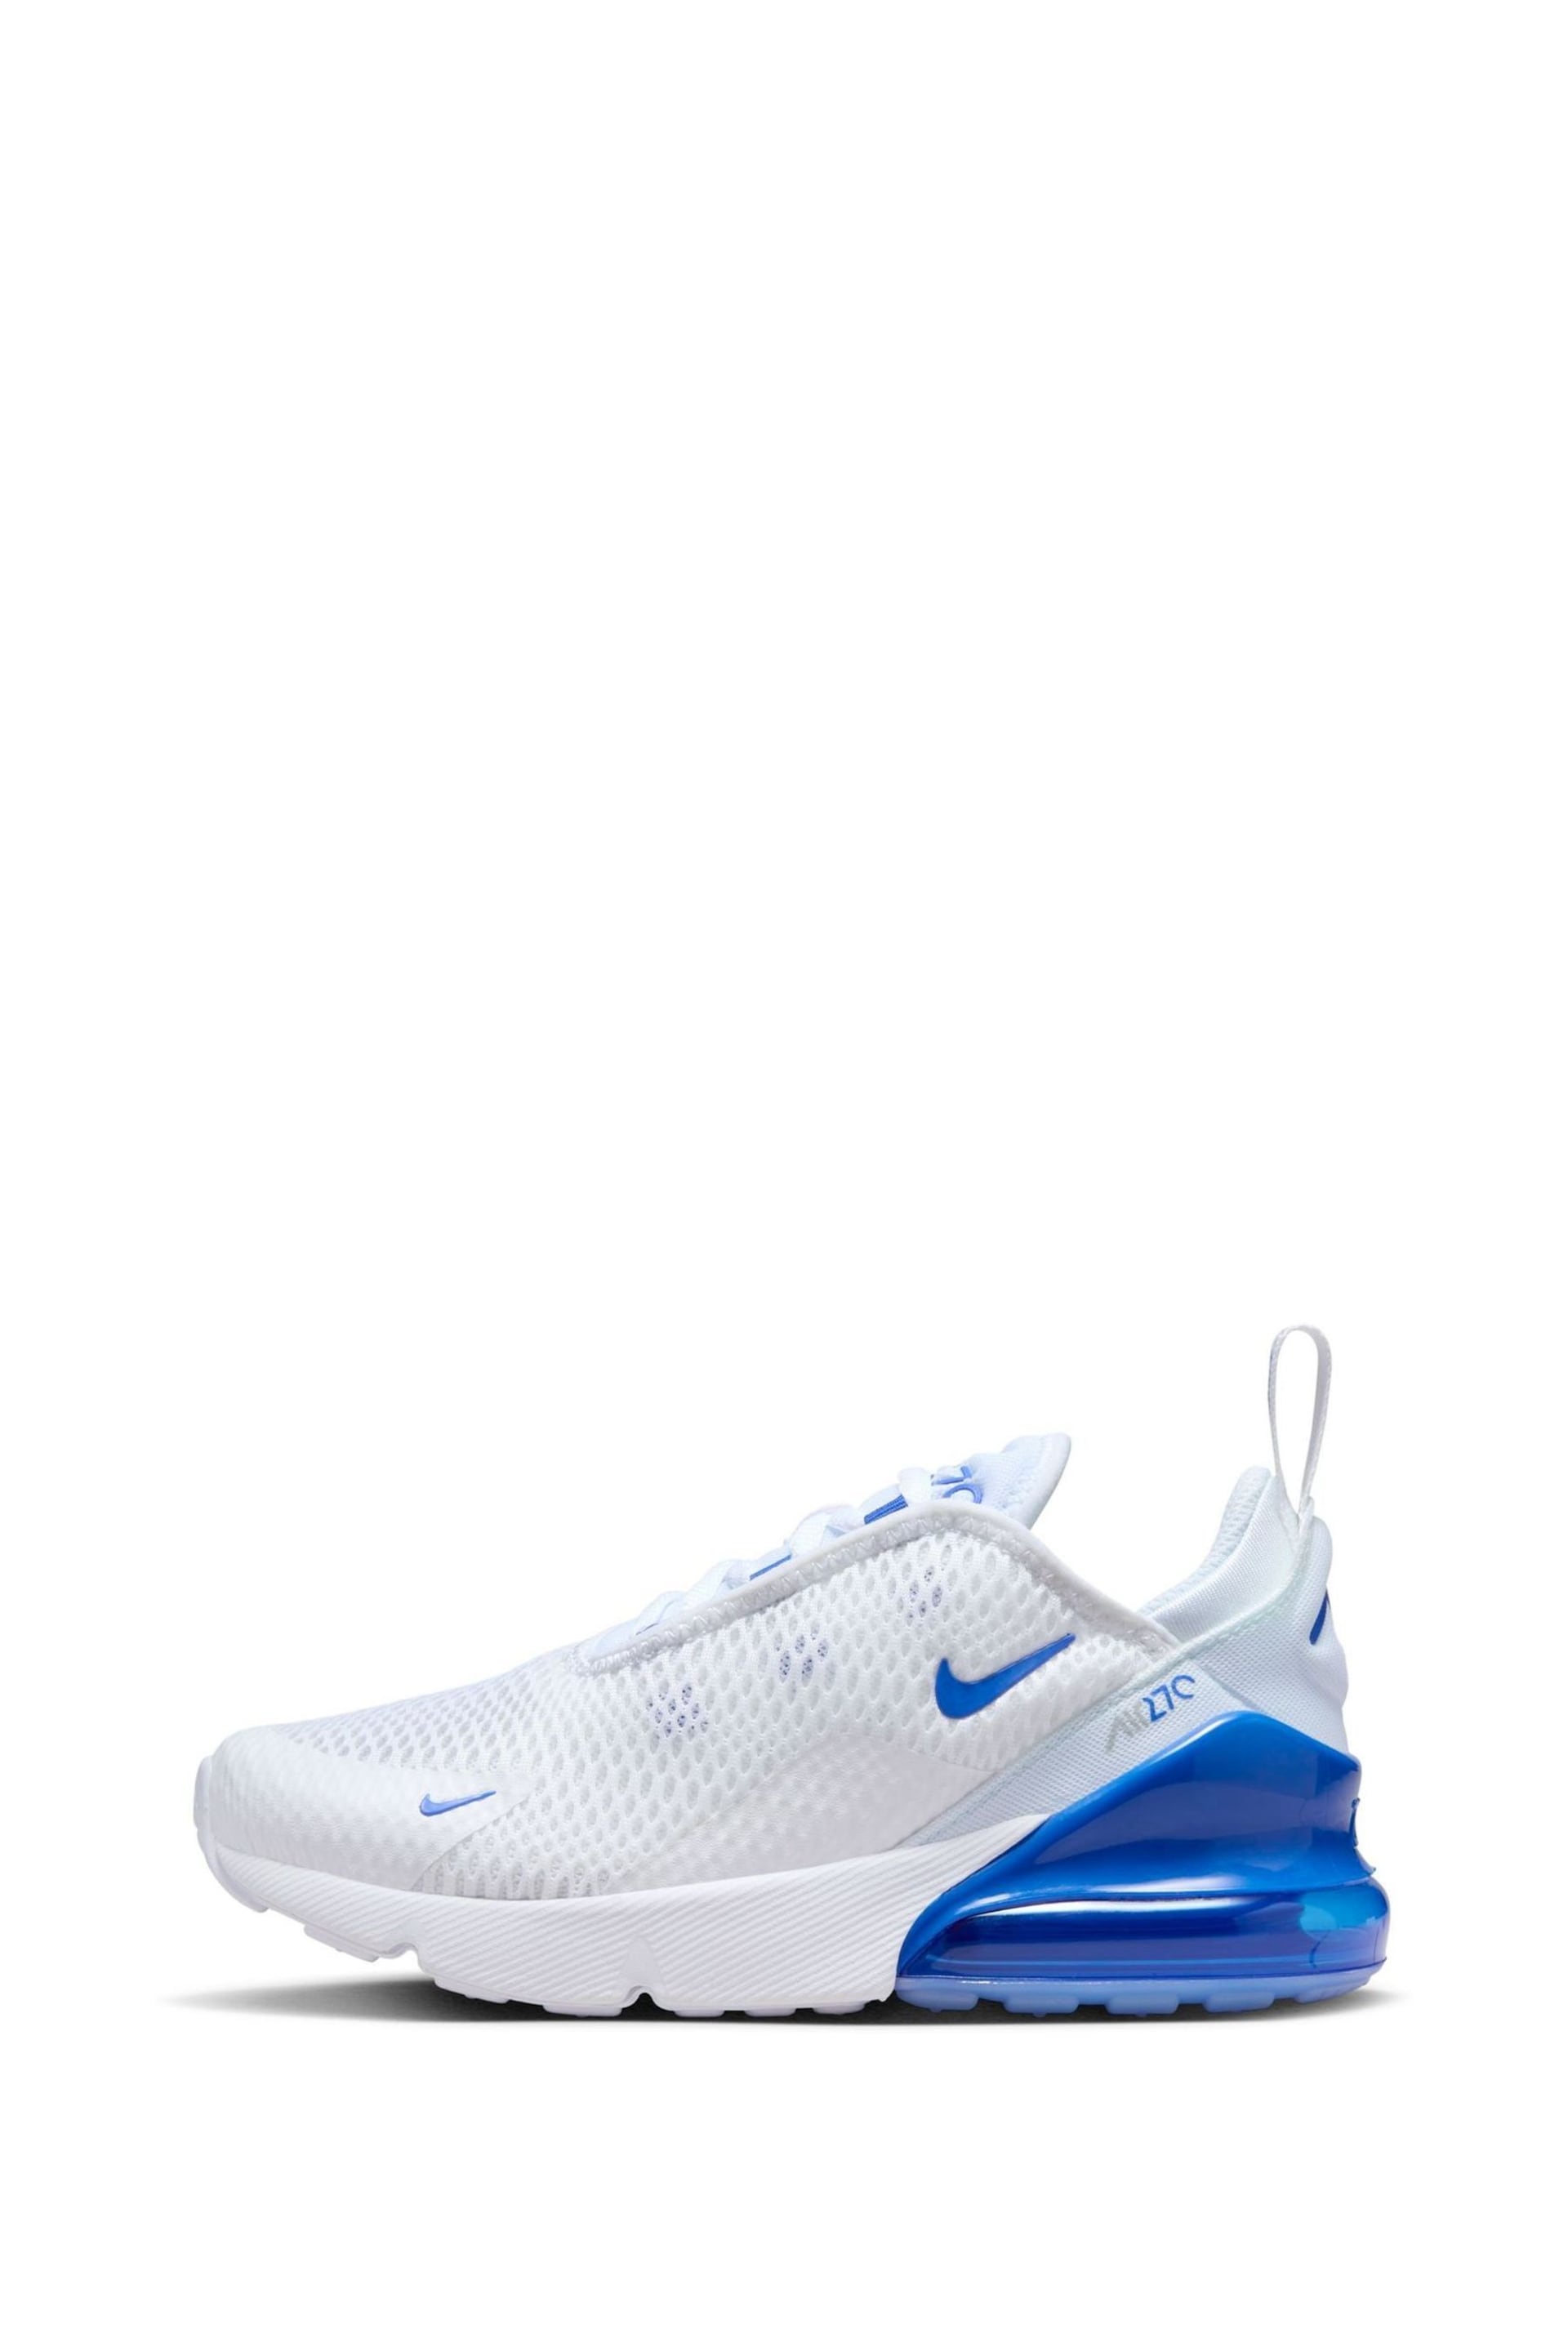 Nike White/Royal Blue Air Max 270 Junior Trainers - Image 6 of 10